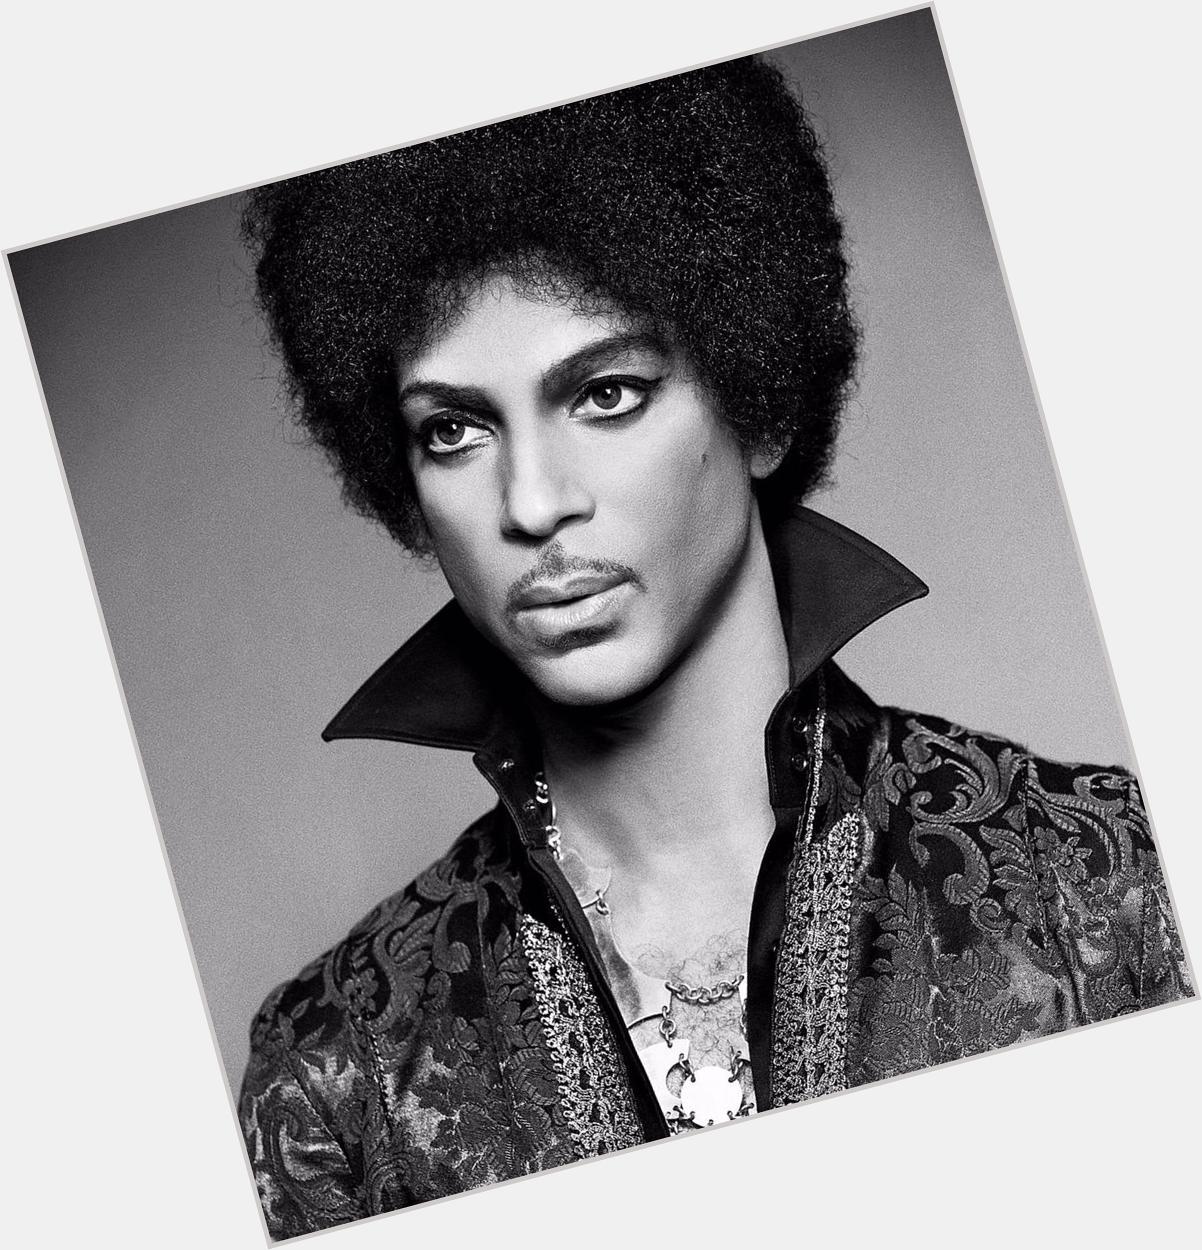 Happy birthday to the amazing man that is PRINCE , after watching you preform darling nikki you changed my life  